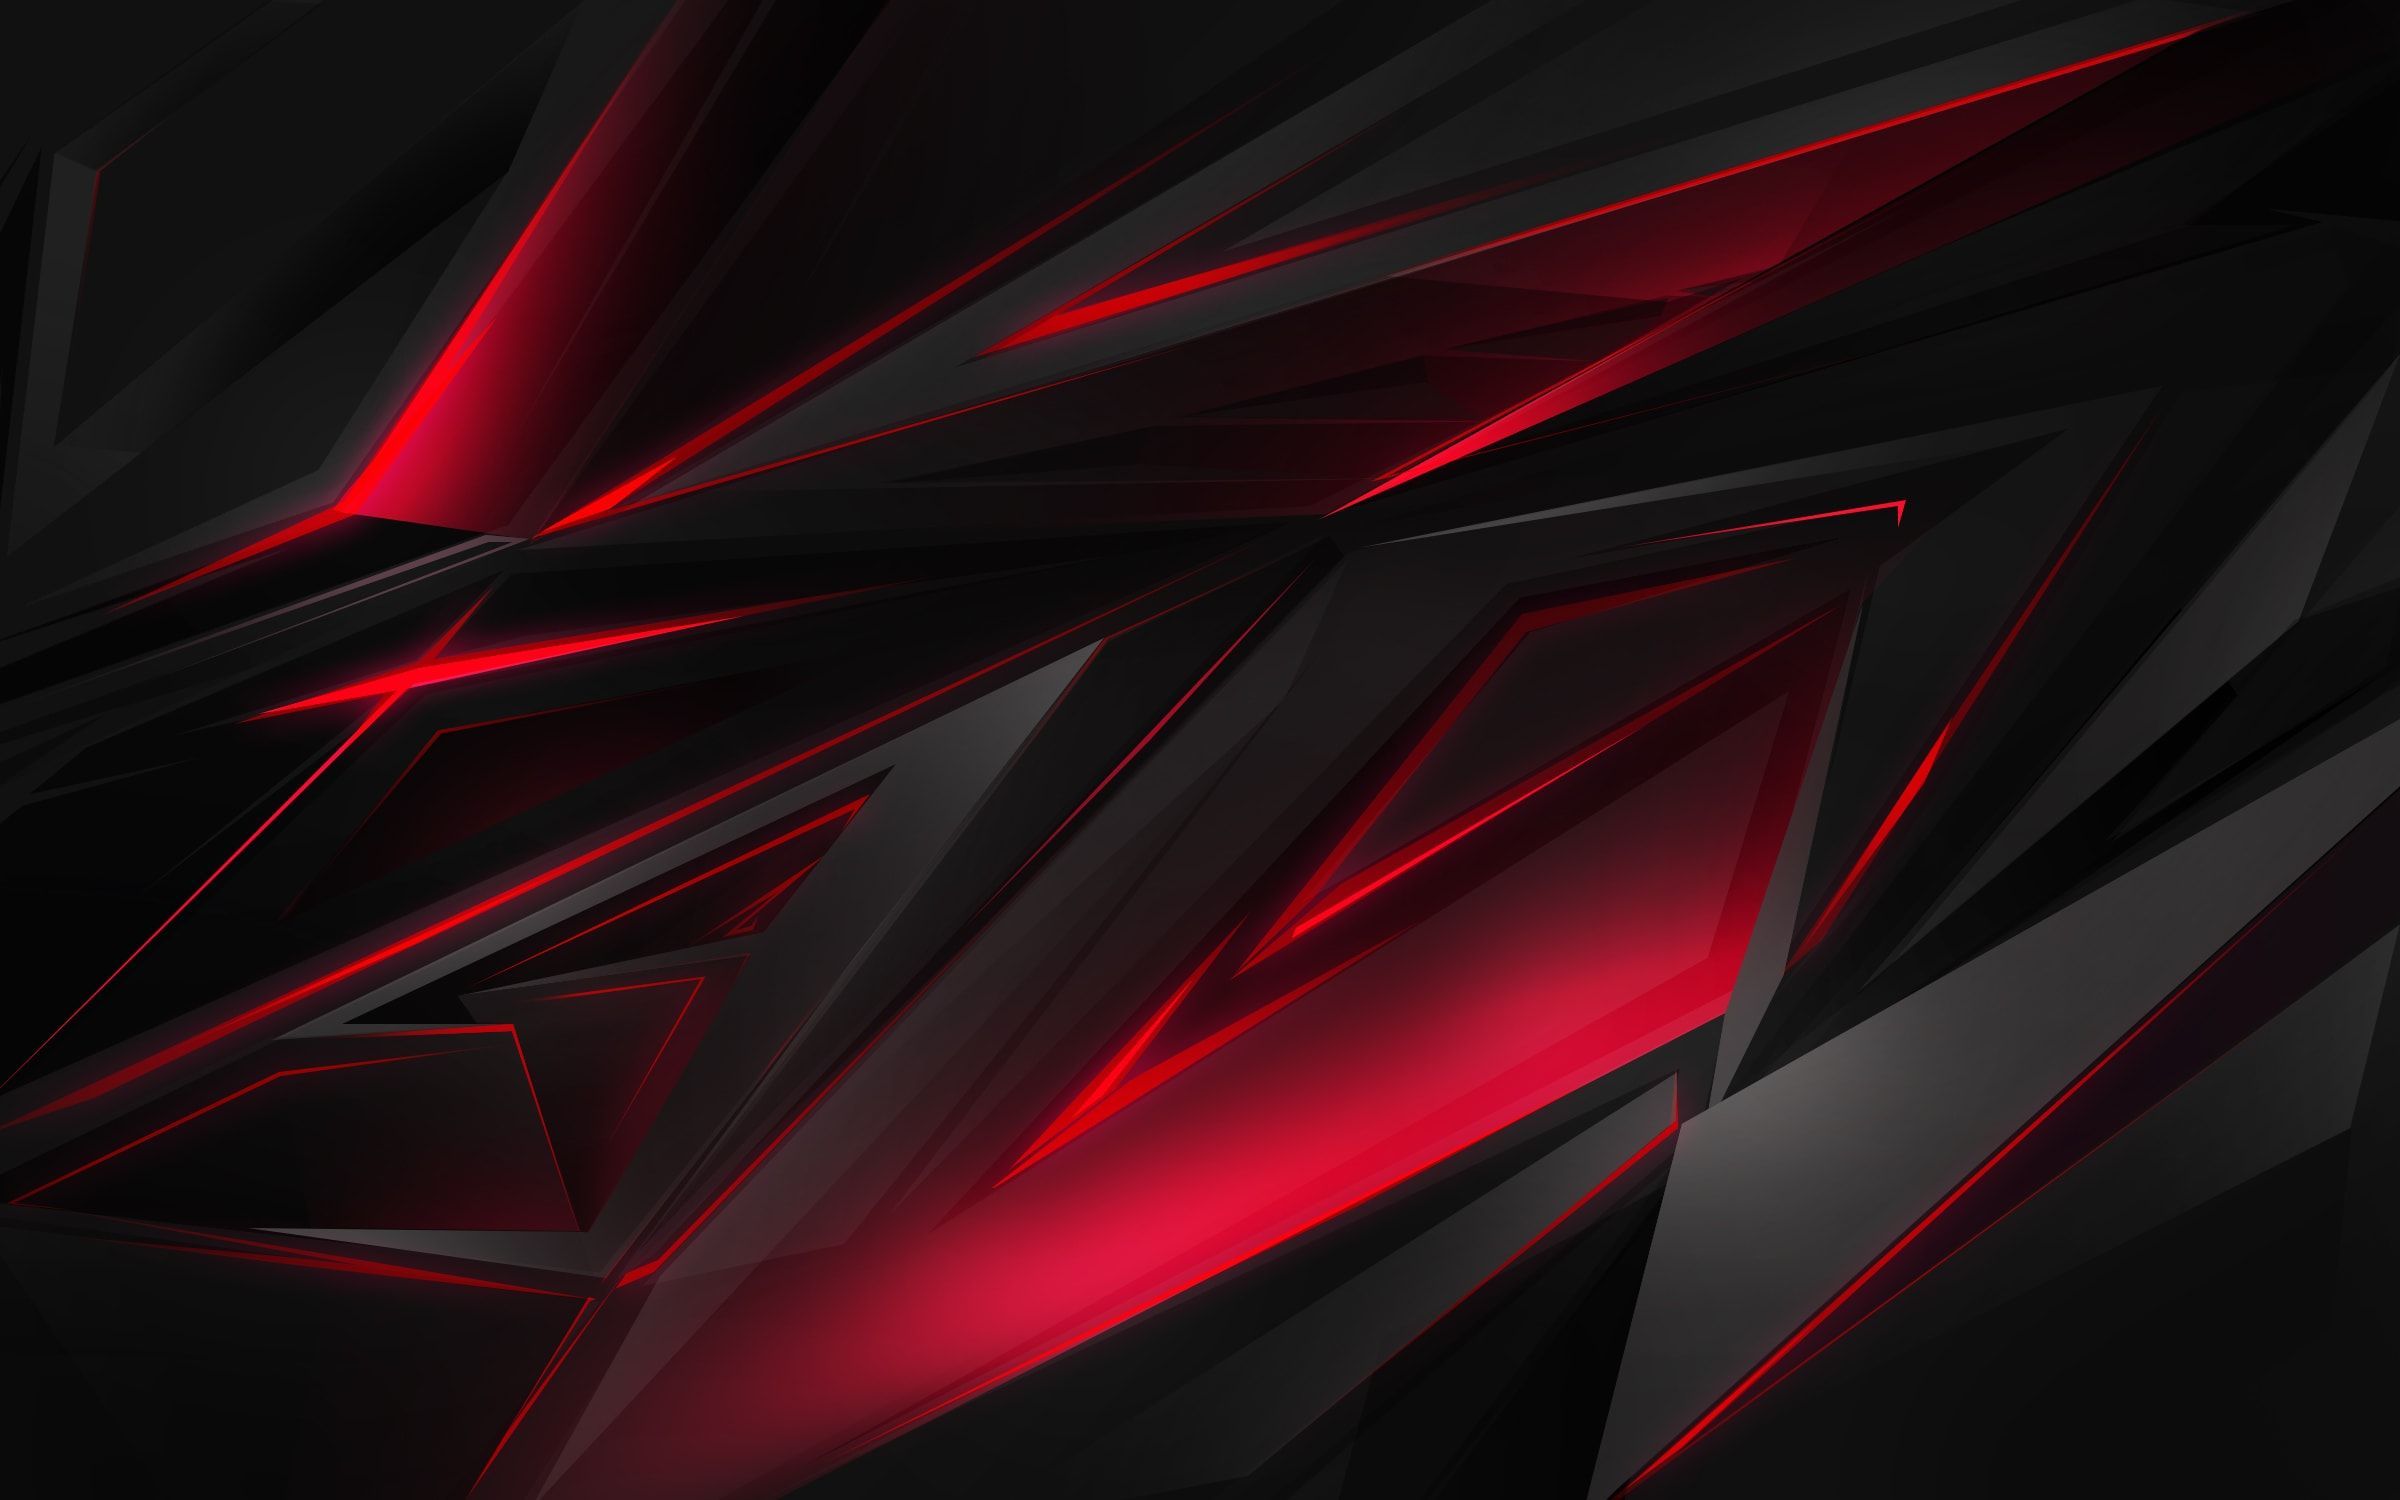 Polygonal Abstract Red Dark Polygonal Abstract Red Dark is an HD desktop wallpaper posted in our free i. Red and black wallpaper, Red wallpaper, Black wallpaper